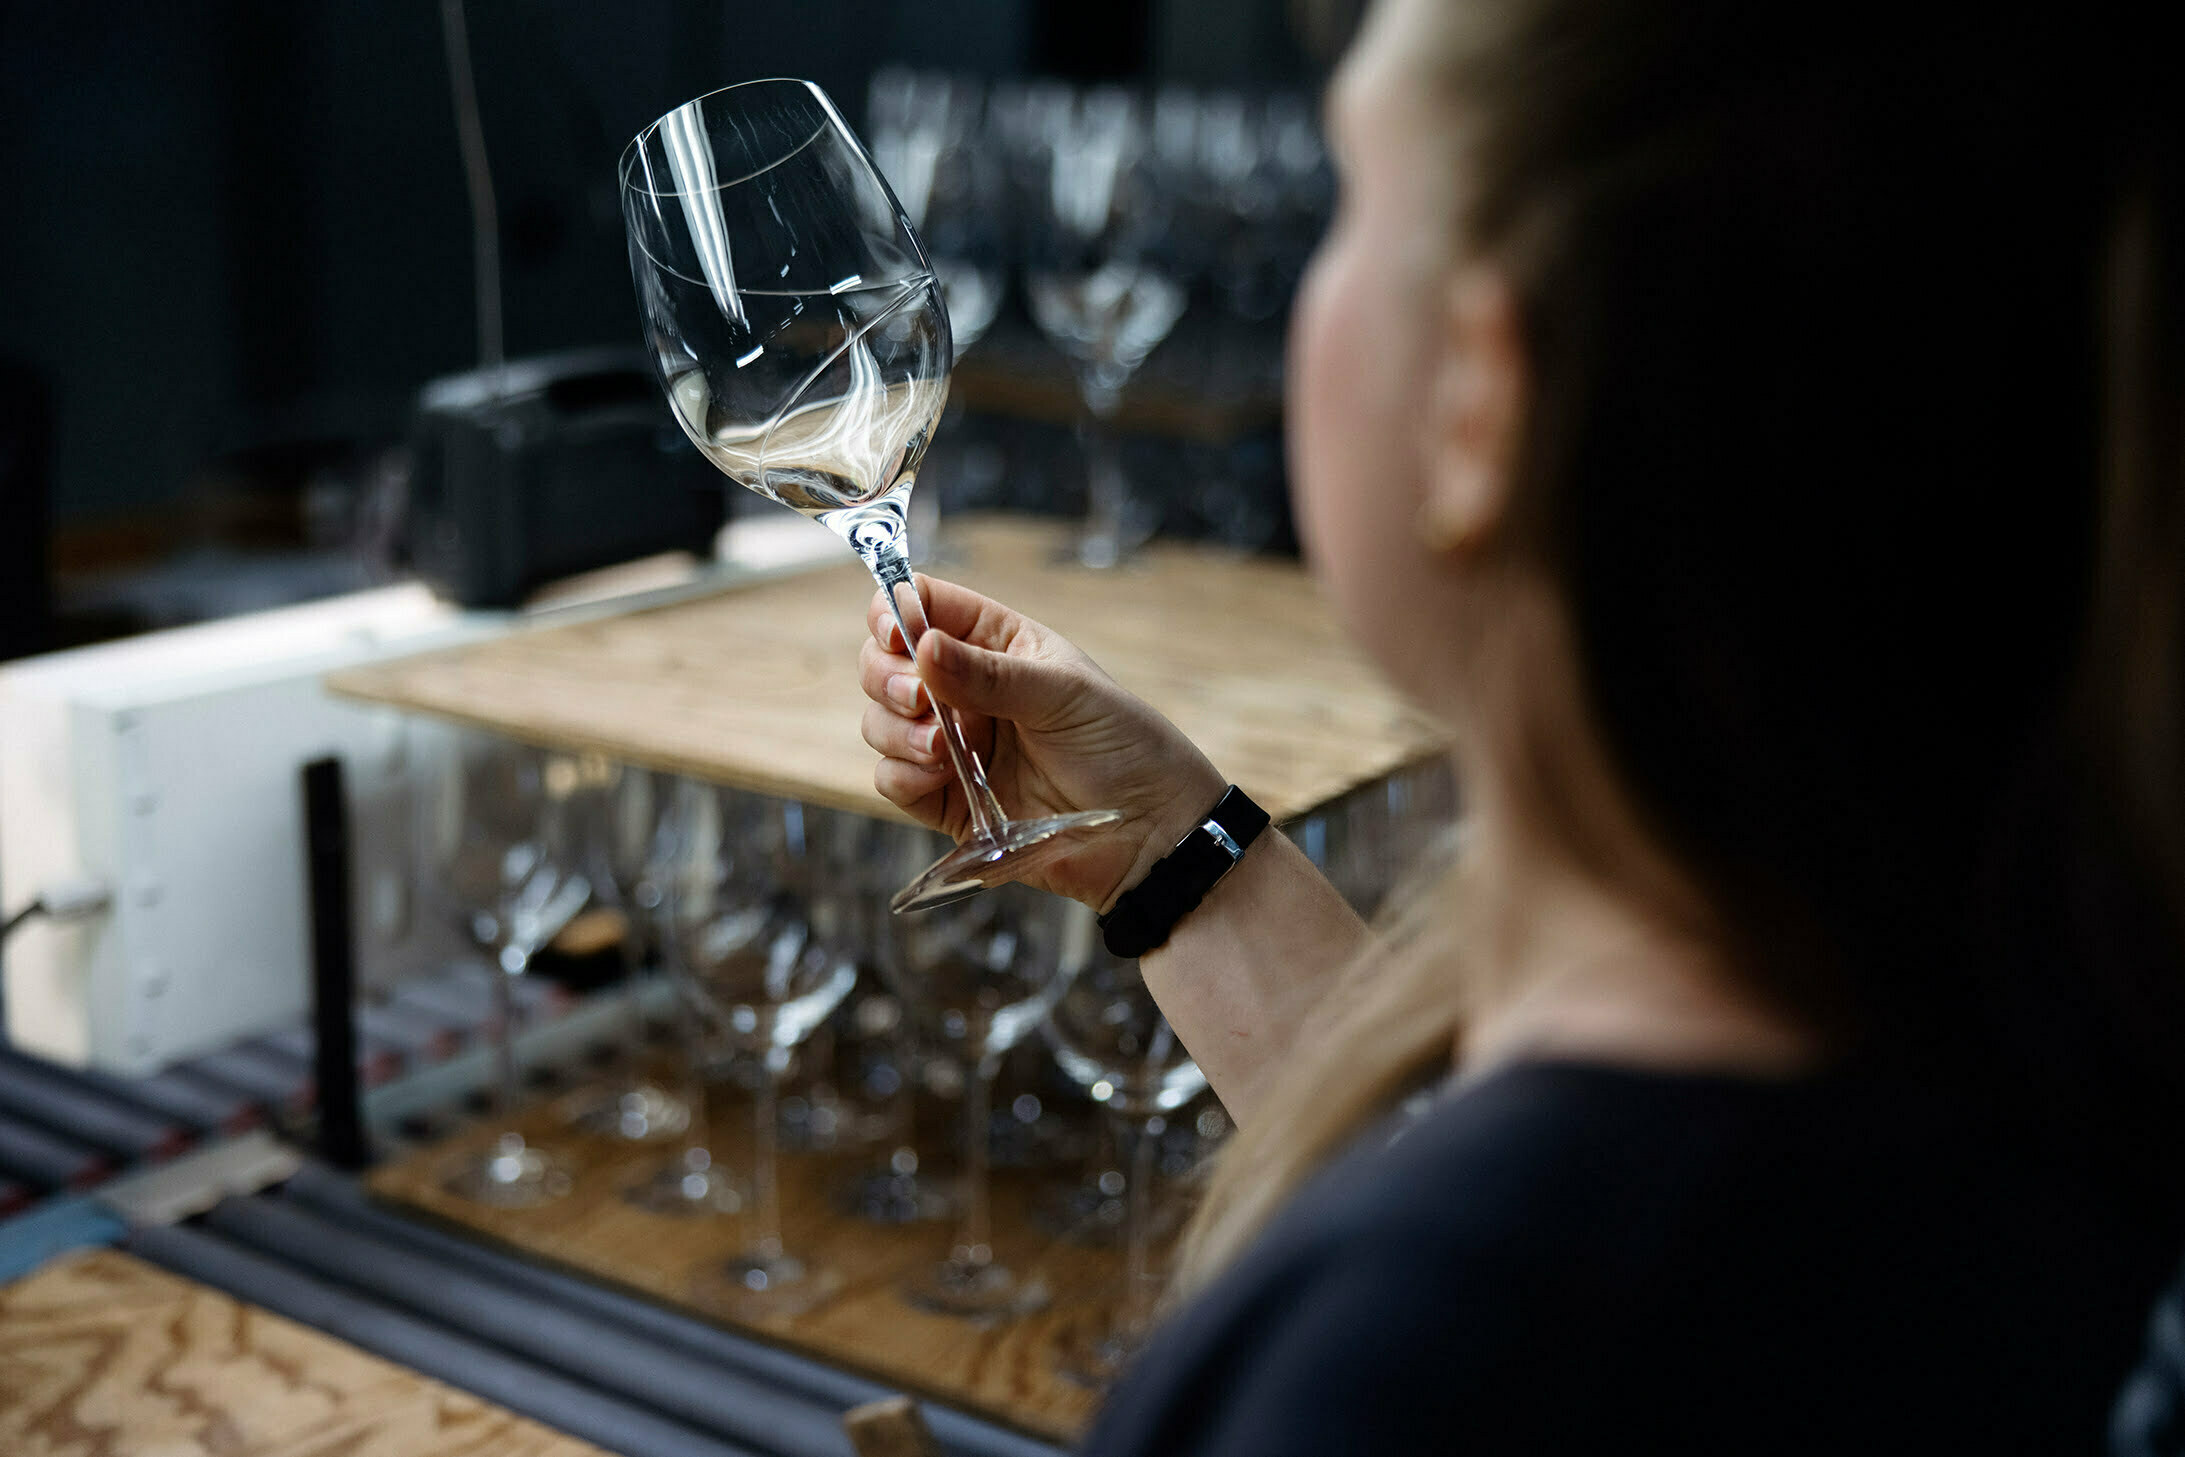 Inspection of wine glasses in the Kingdom of Glass